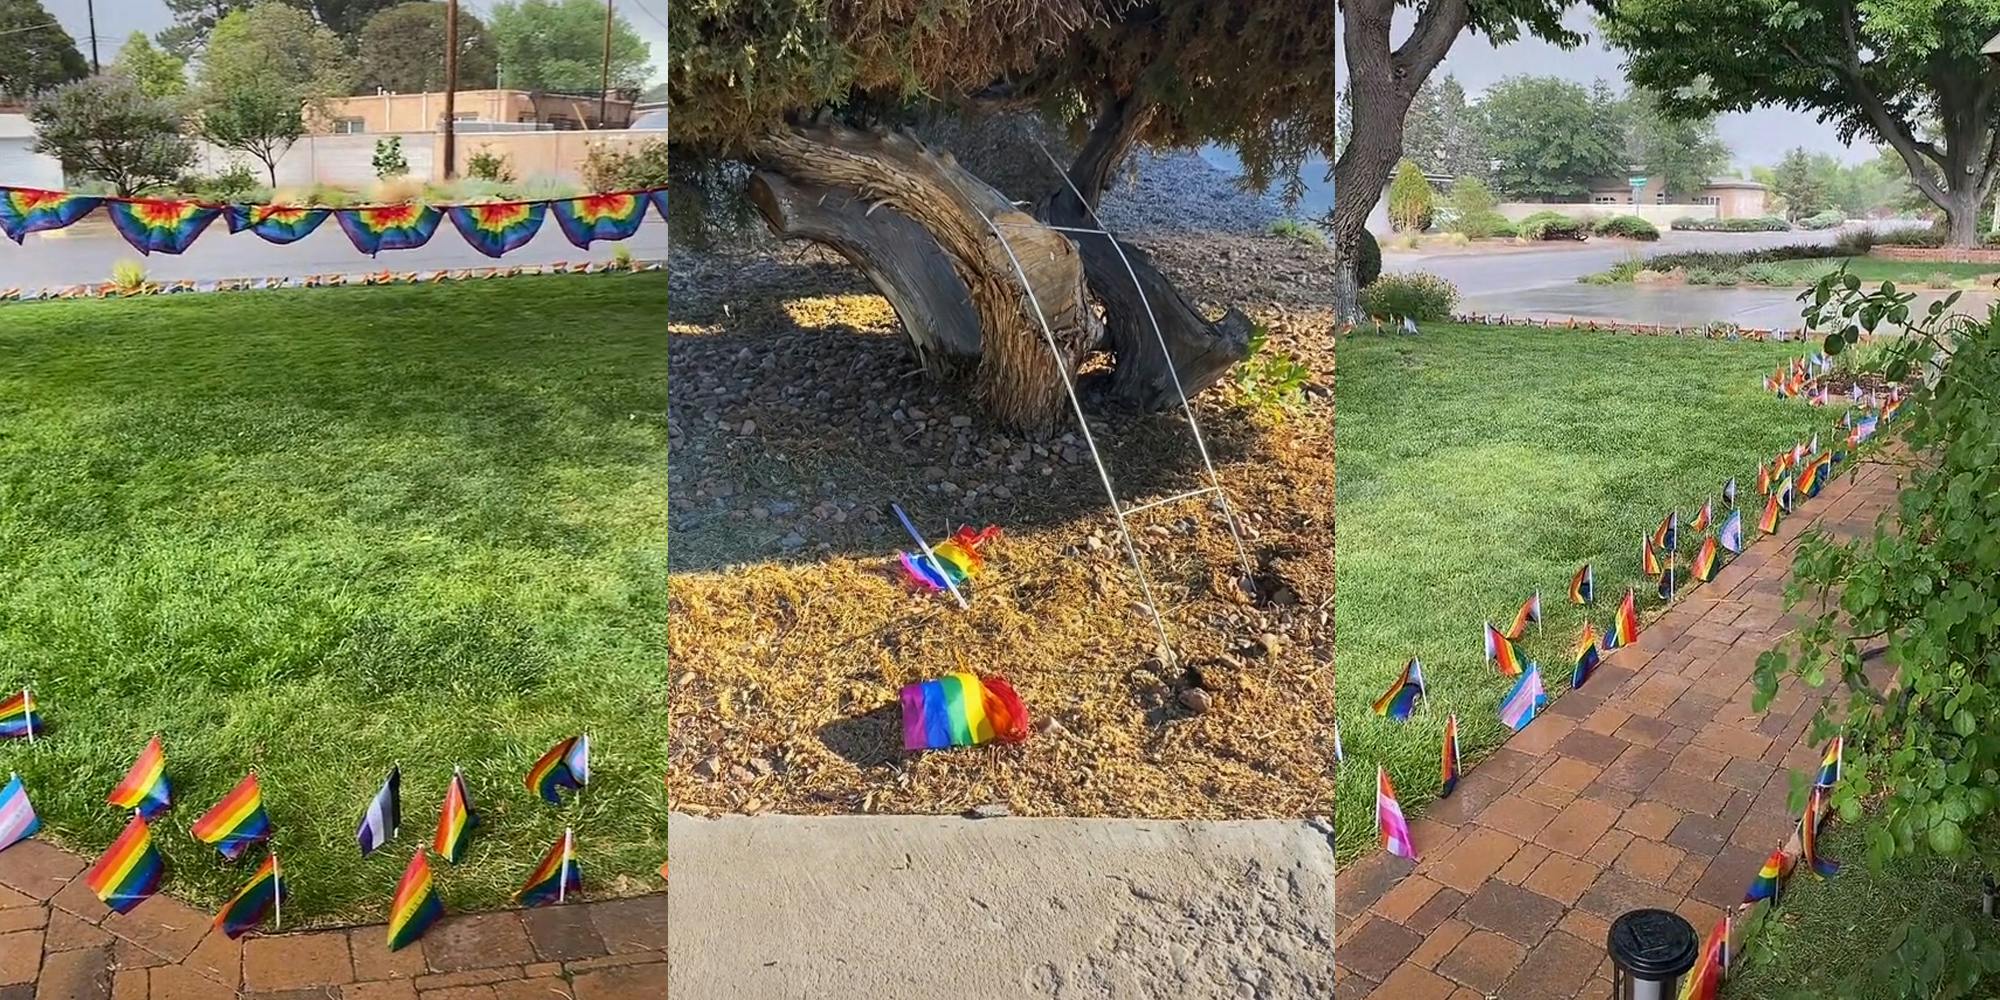 Yard with Pride decorations hung between trees and flags lining a paved walkway (l) Pride flag on the ground damaged on a tree (c) Pride flags lining a brick walkway leading to driveway (r)